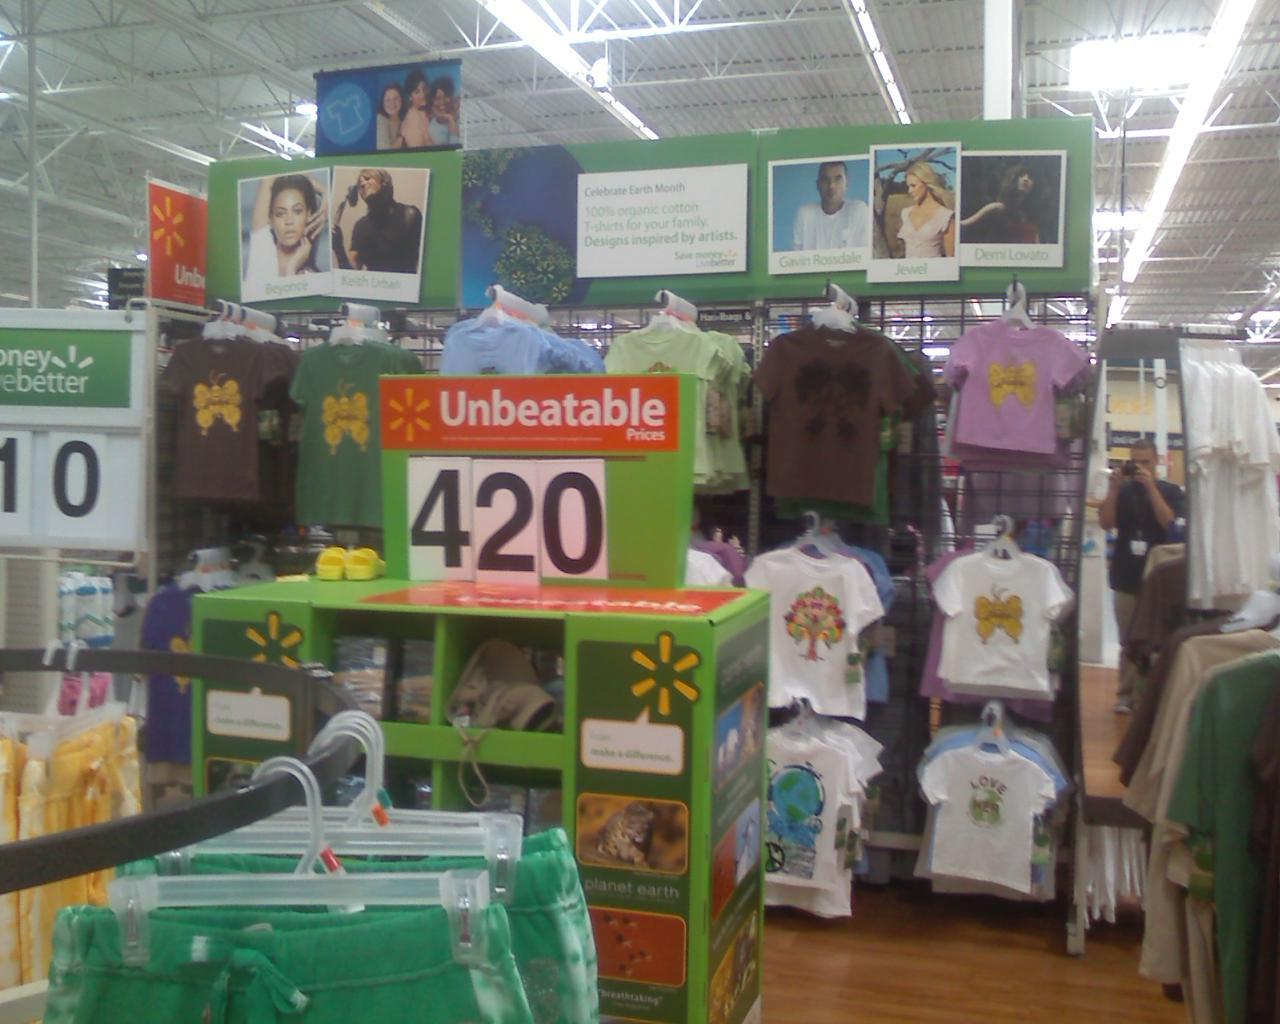 Was on display at my local Wal-Mart Supercenter yesterday (4-20-09) in the "Go Green" clothing section lol